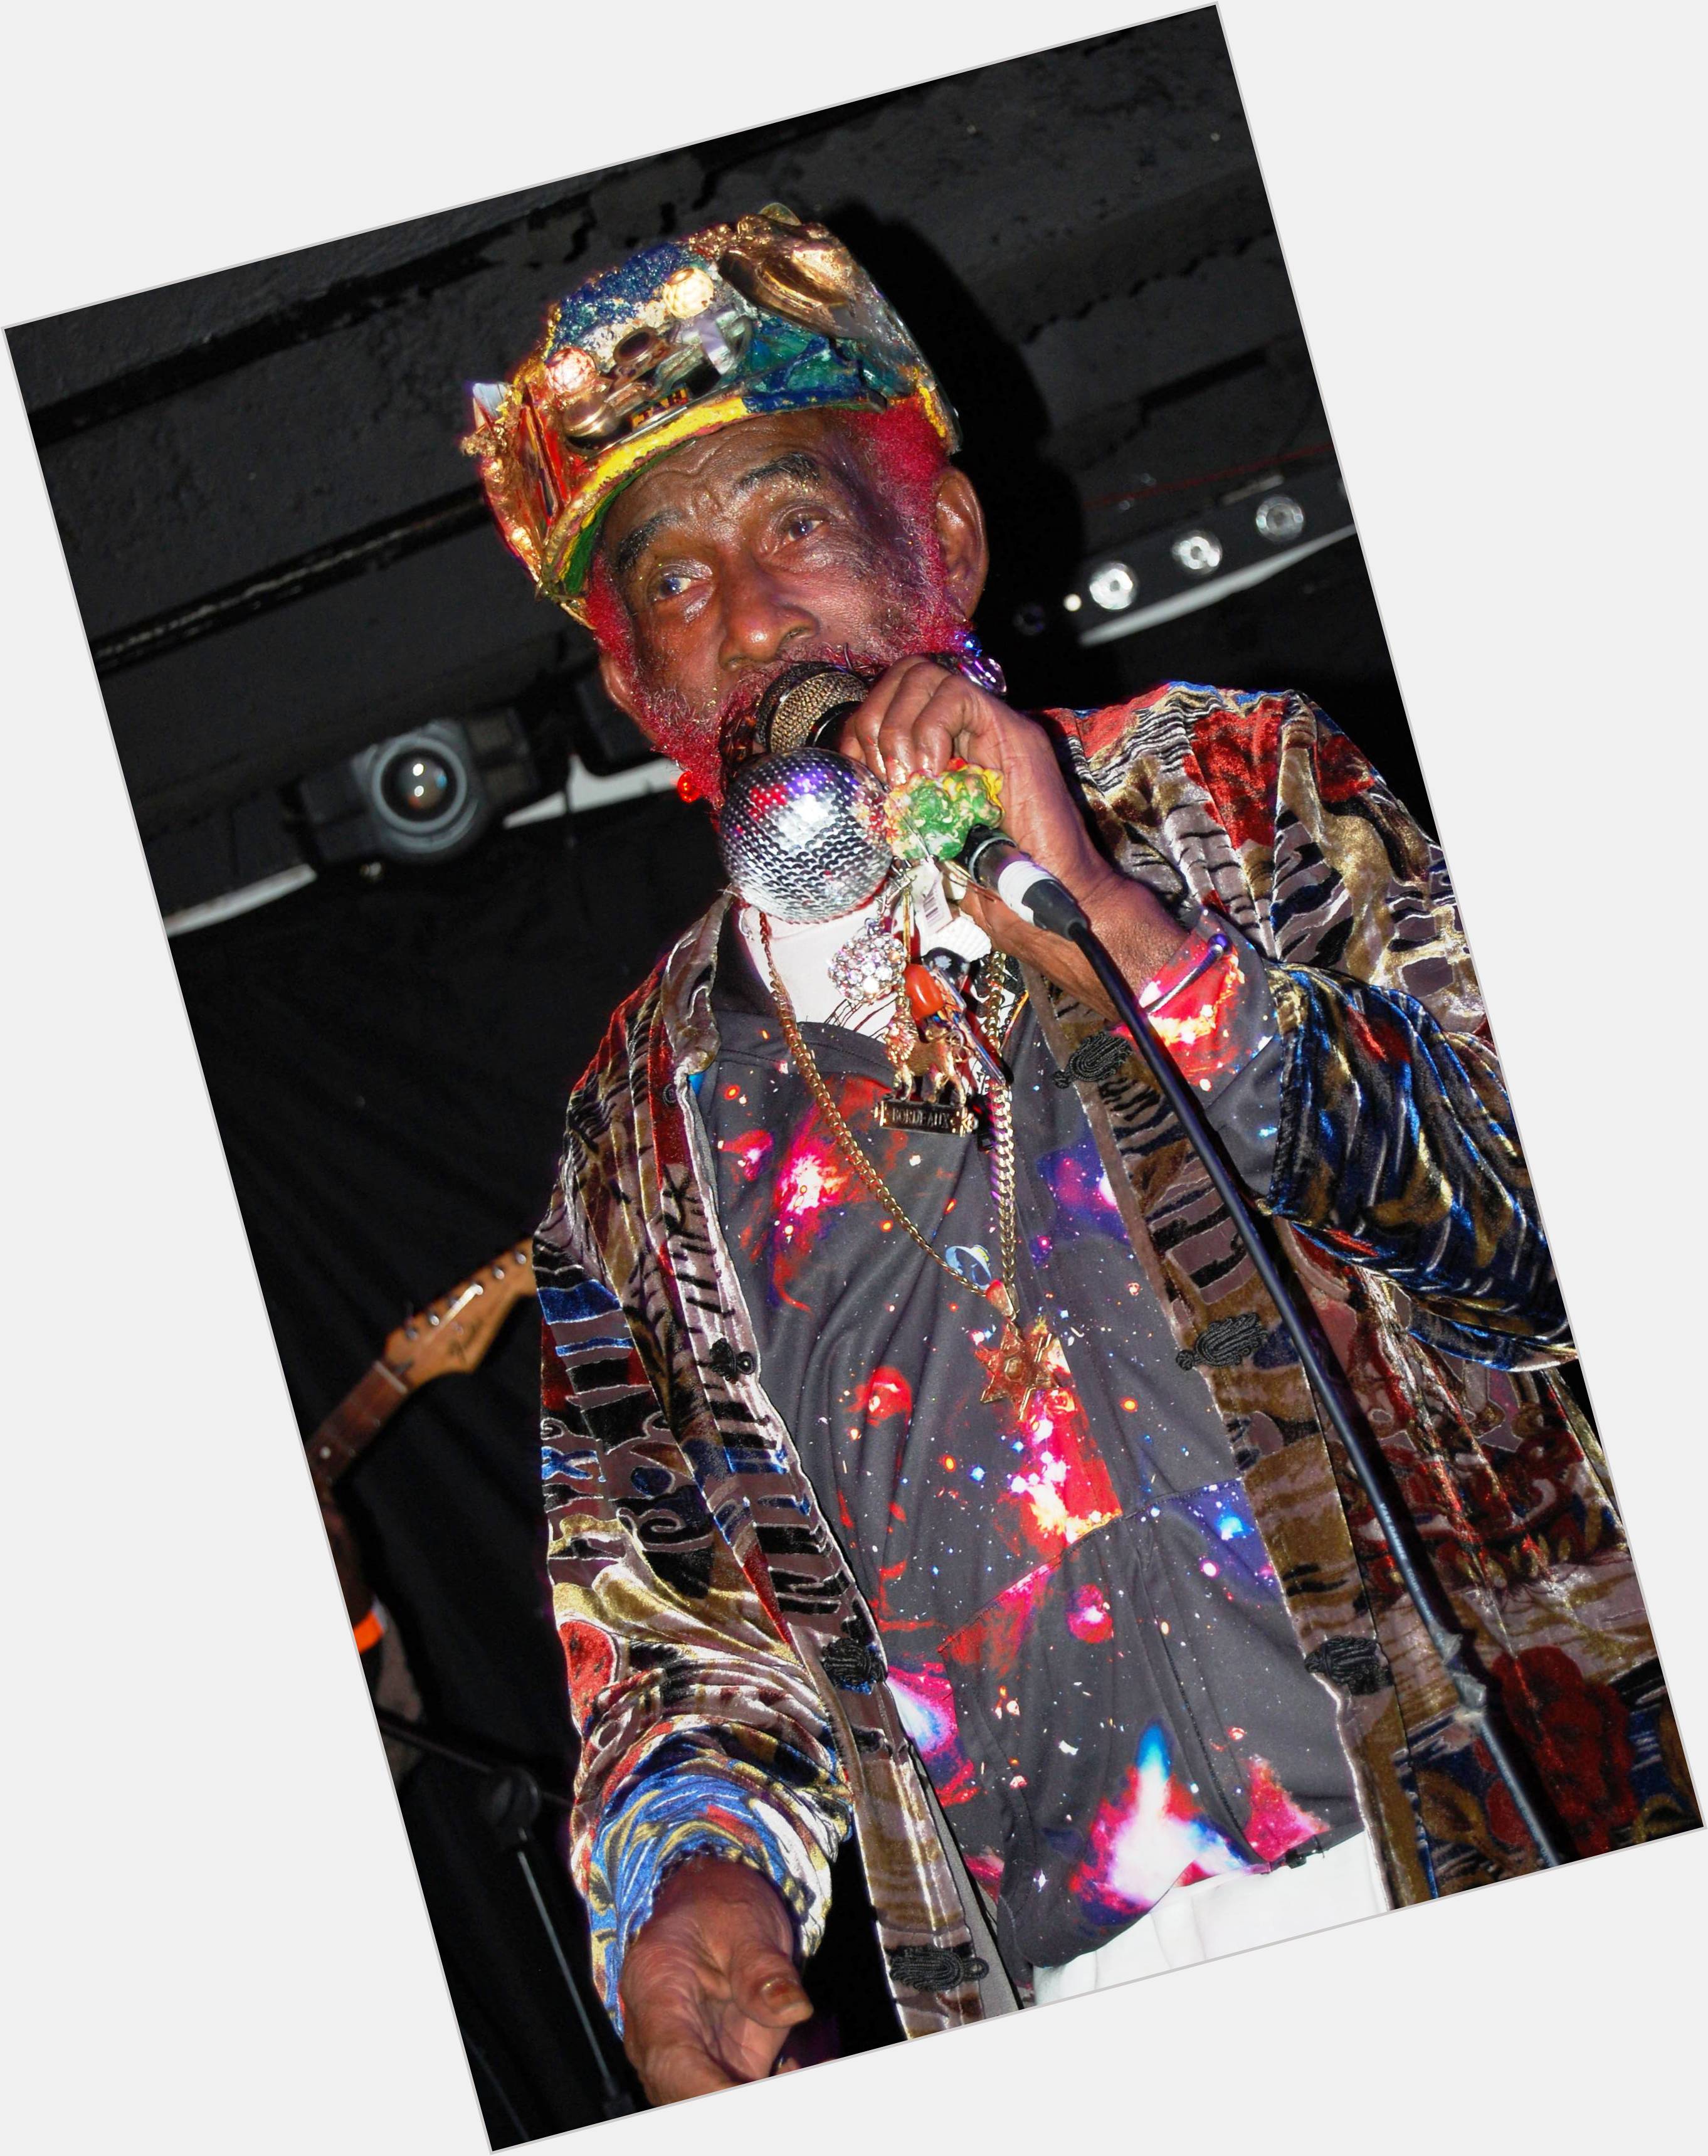 Http://fanpagepress.net/m/L/Lee Scratch Perry Dating 2